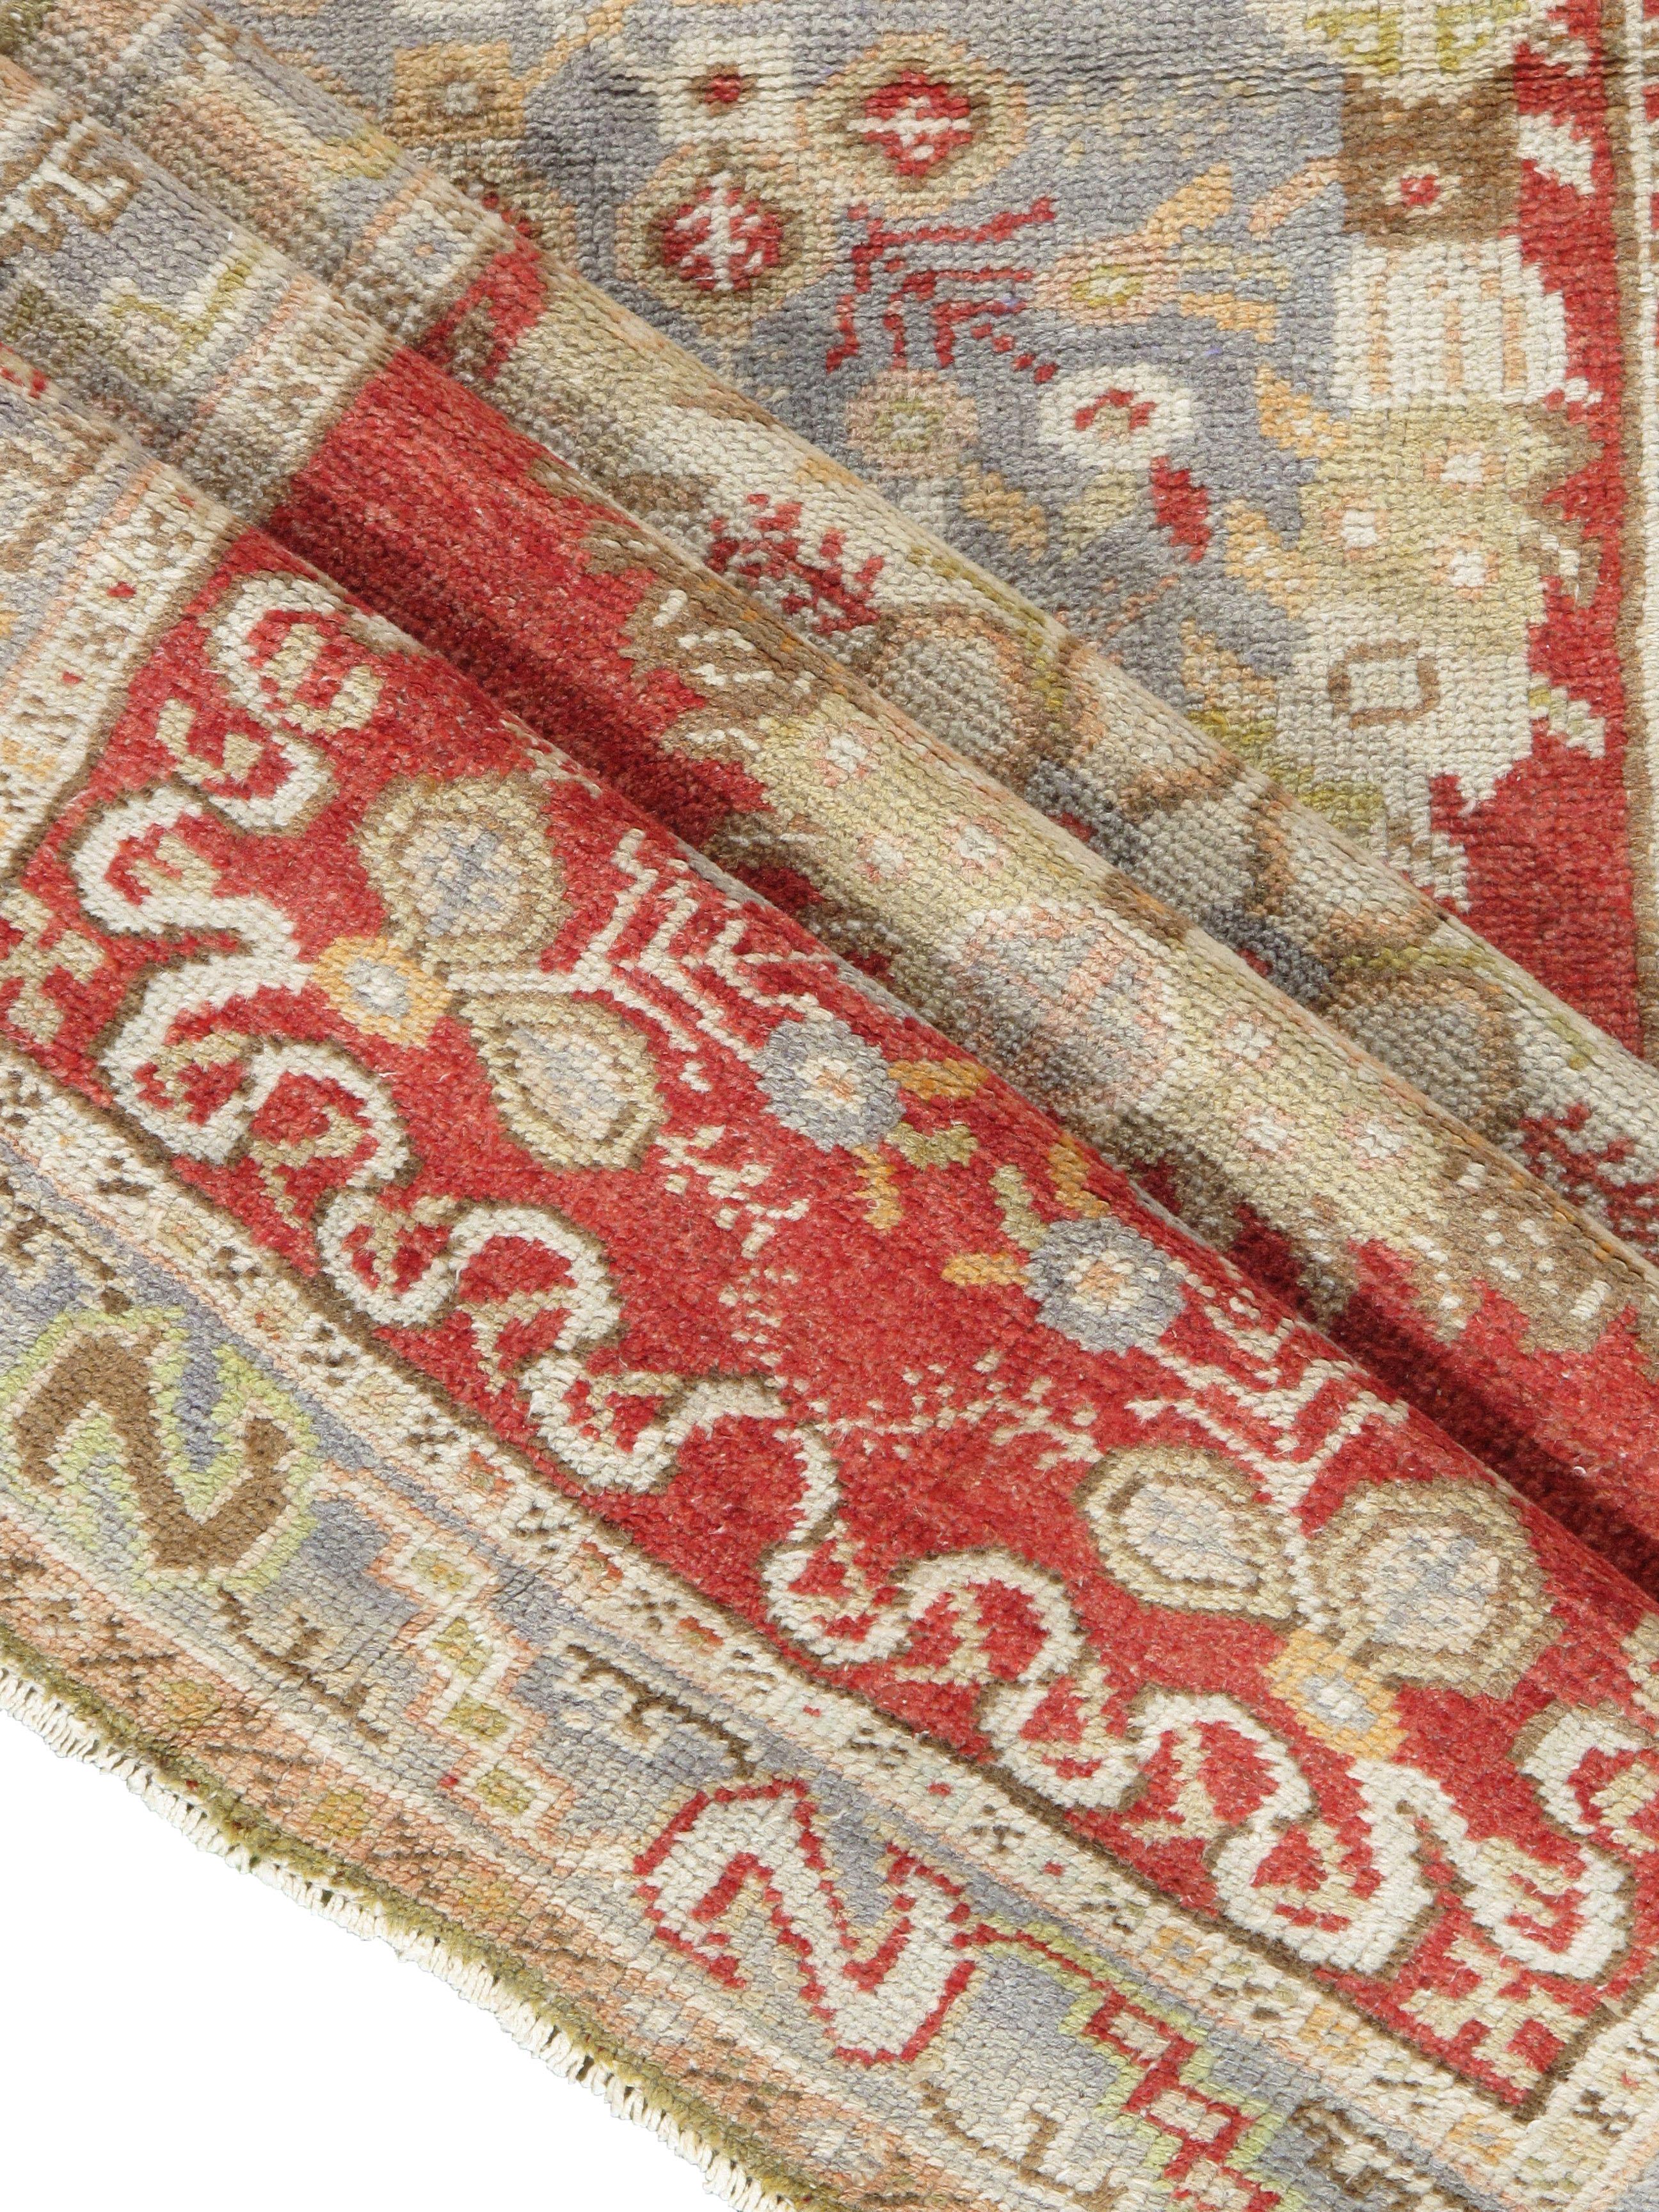 Vintage Turkish Oushak runner rug, 2'11 x 11'. Handwoven in Turkey where rug weaving is the culture rather than a business. Rugs from Turkey are known for the high quality of their wool their beautiful patterns and warm colors. These designer